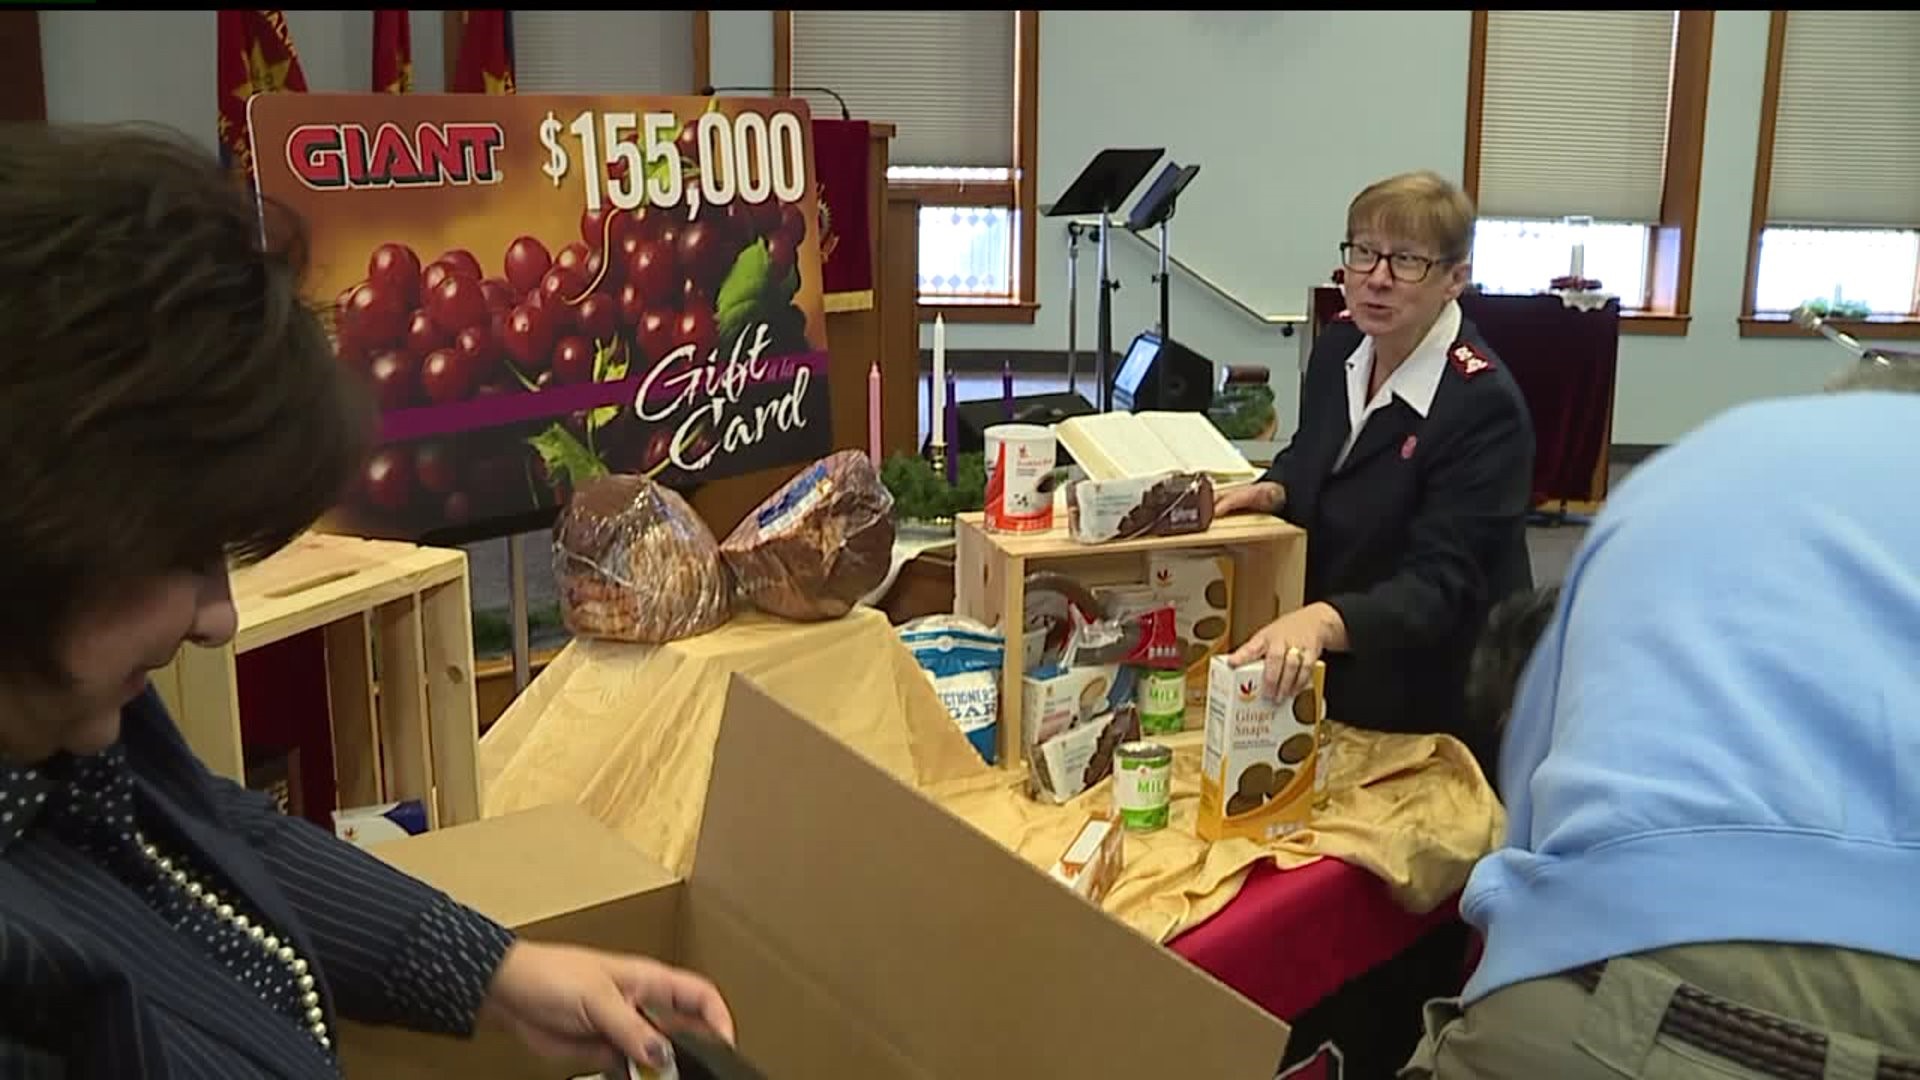 Giant donates to York Salvation Army